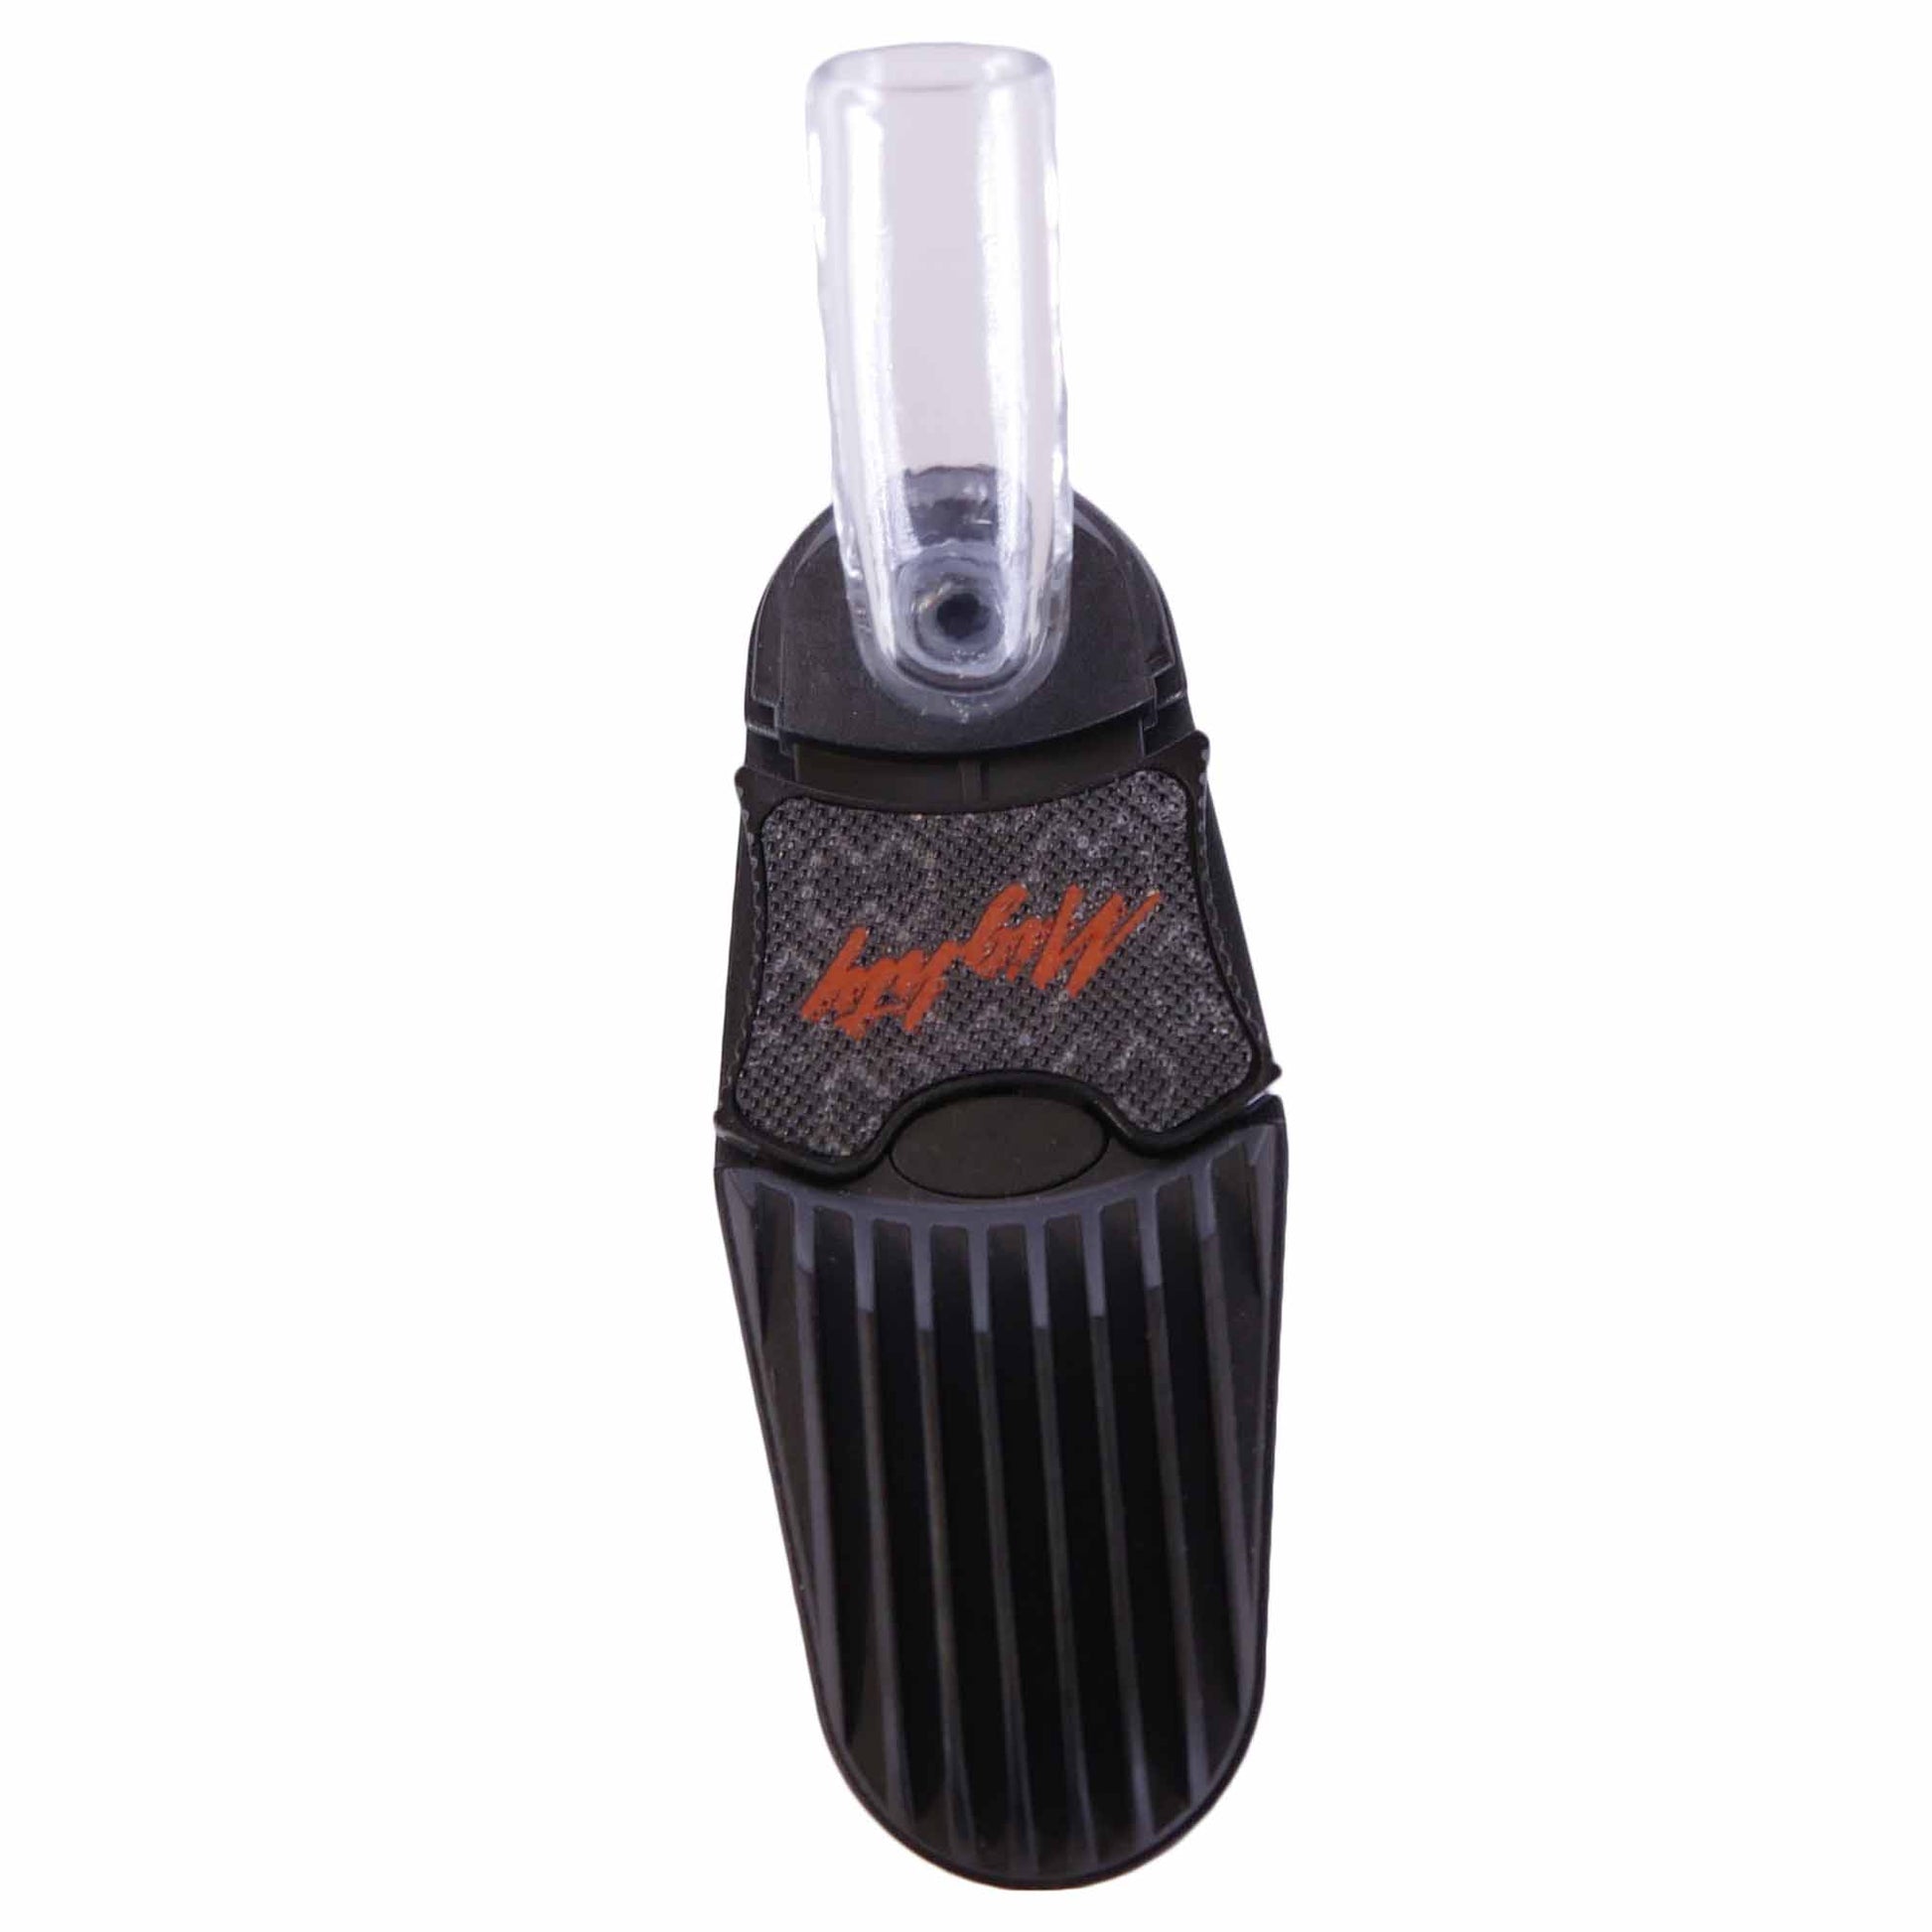 Mighty / Crafty Glass Mouthpiece Vaporizers Custom Accessories 